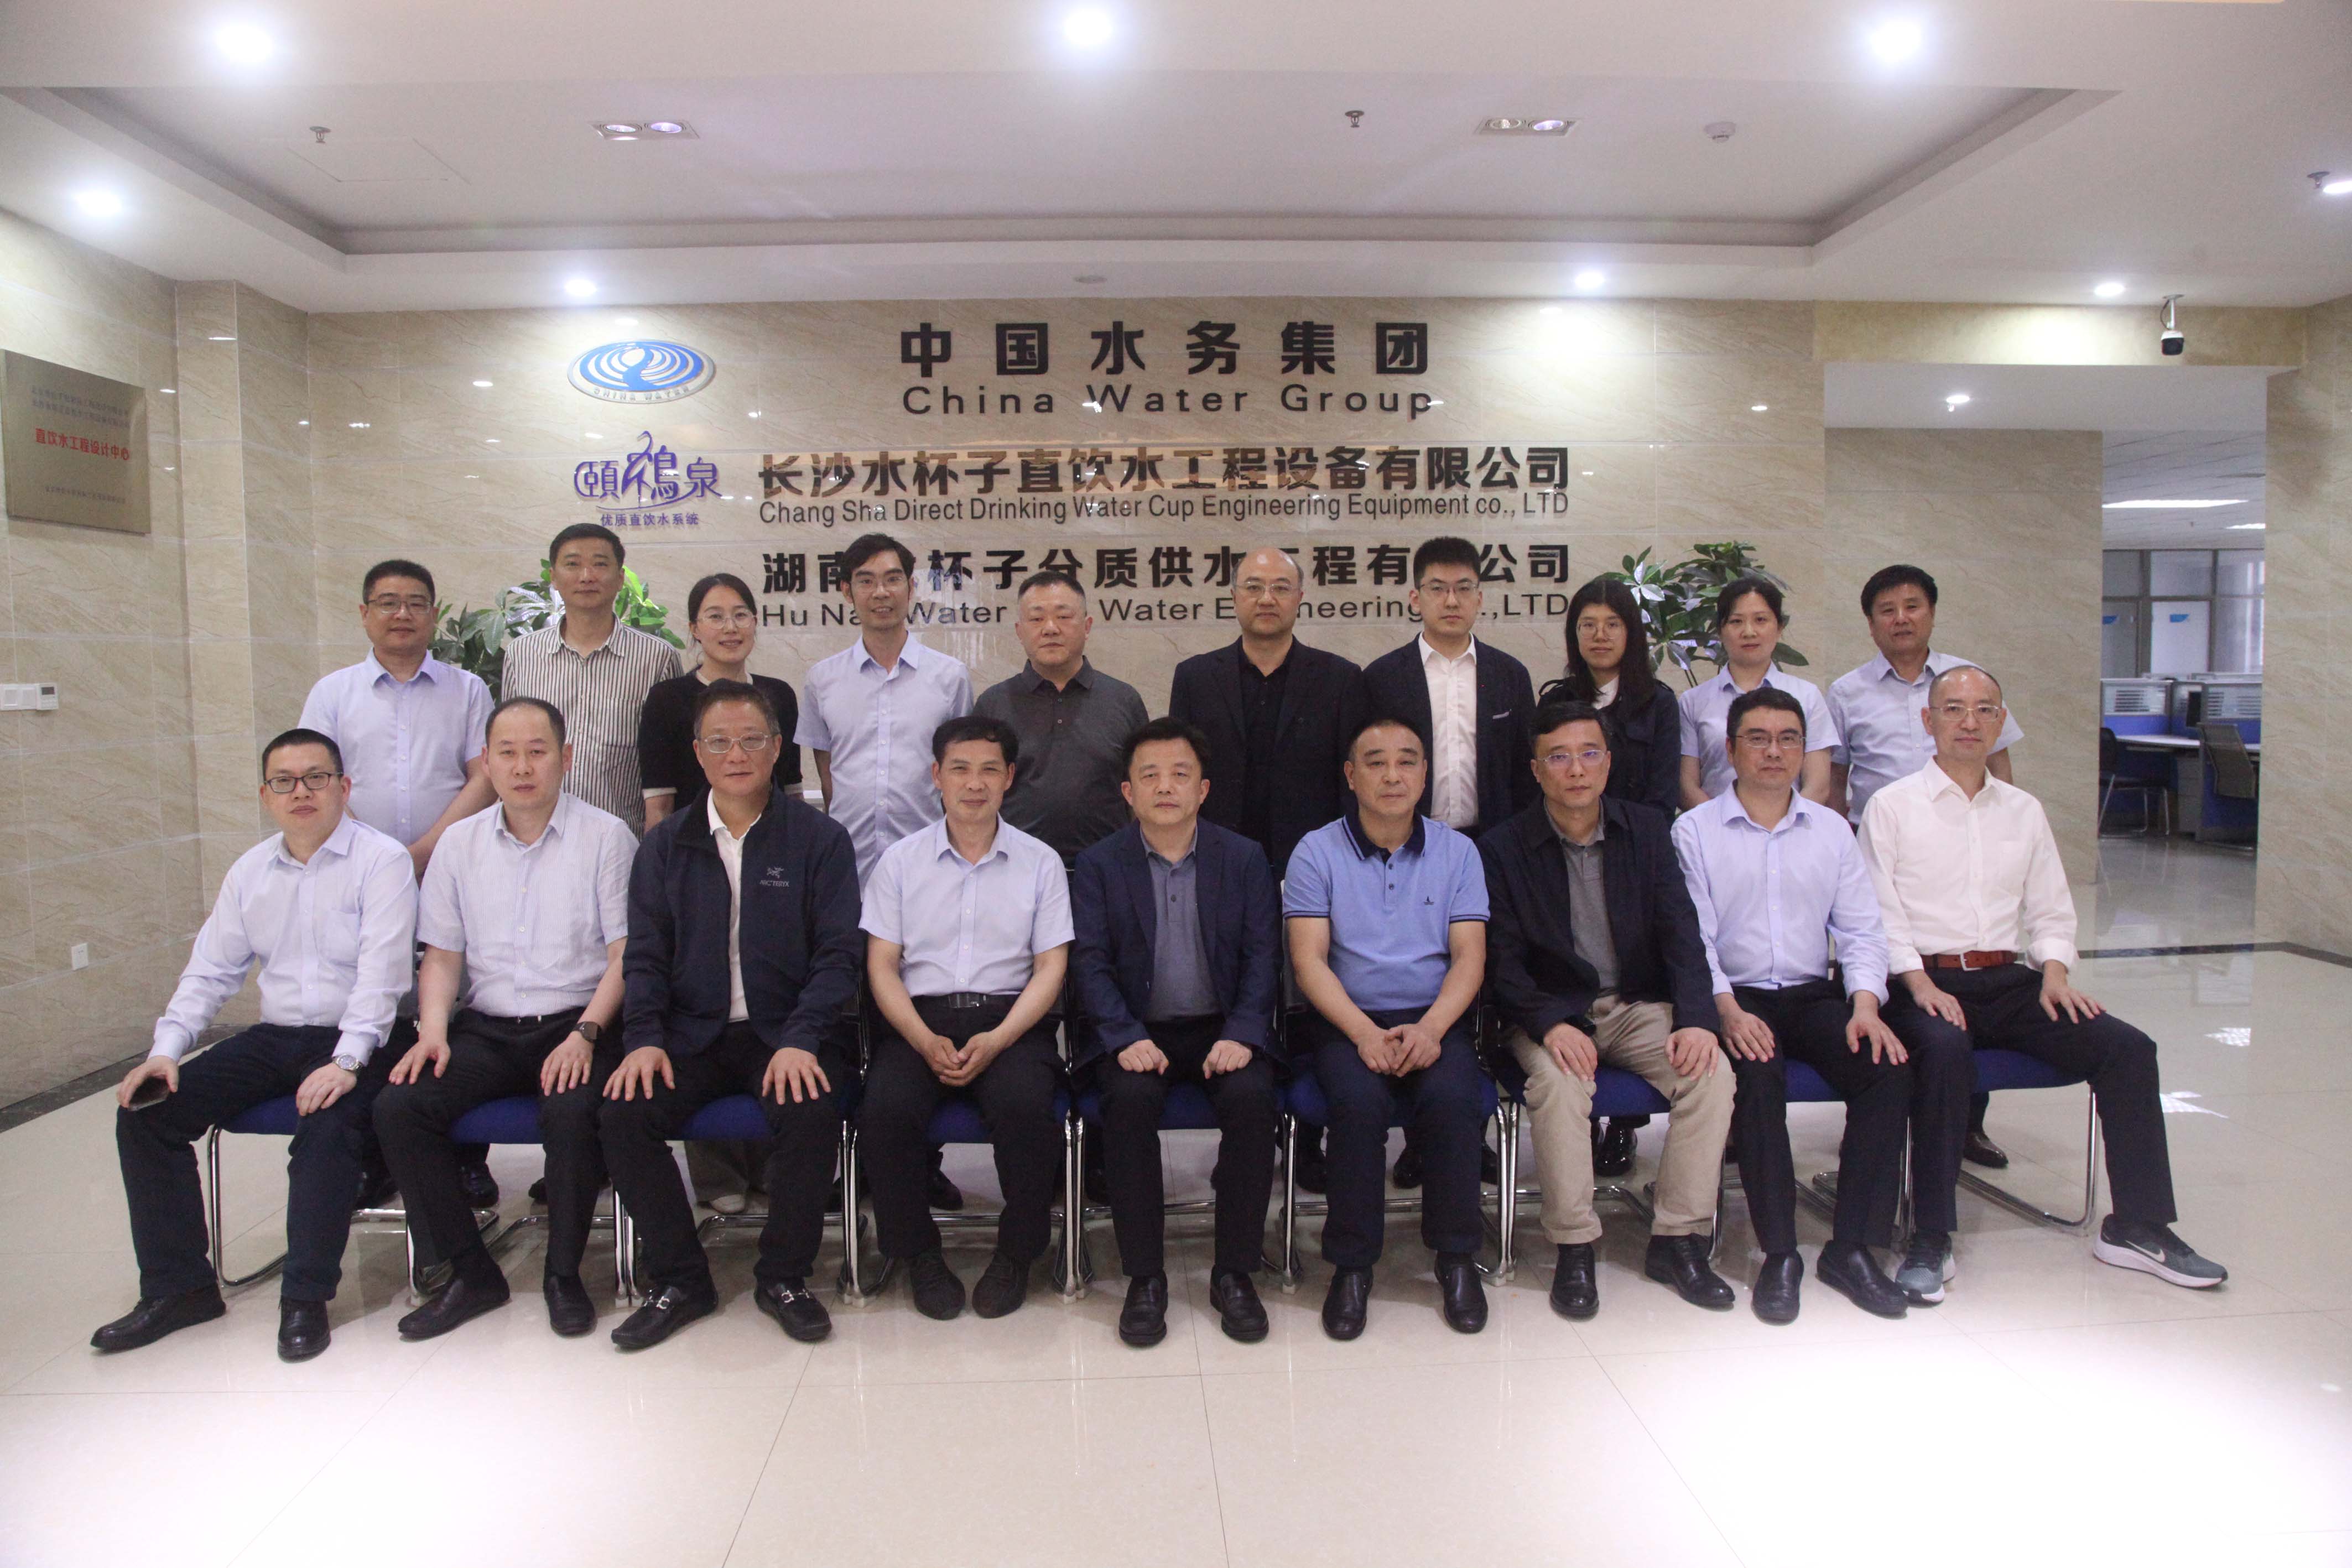 Leaders from Chongqing Water Asset Management Co., Ltd. and Chongqing Water Group visited the company for inspection